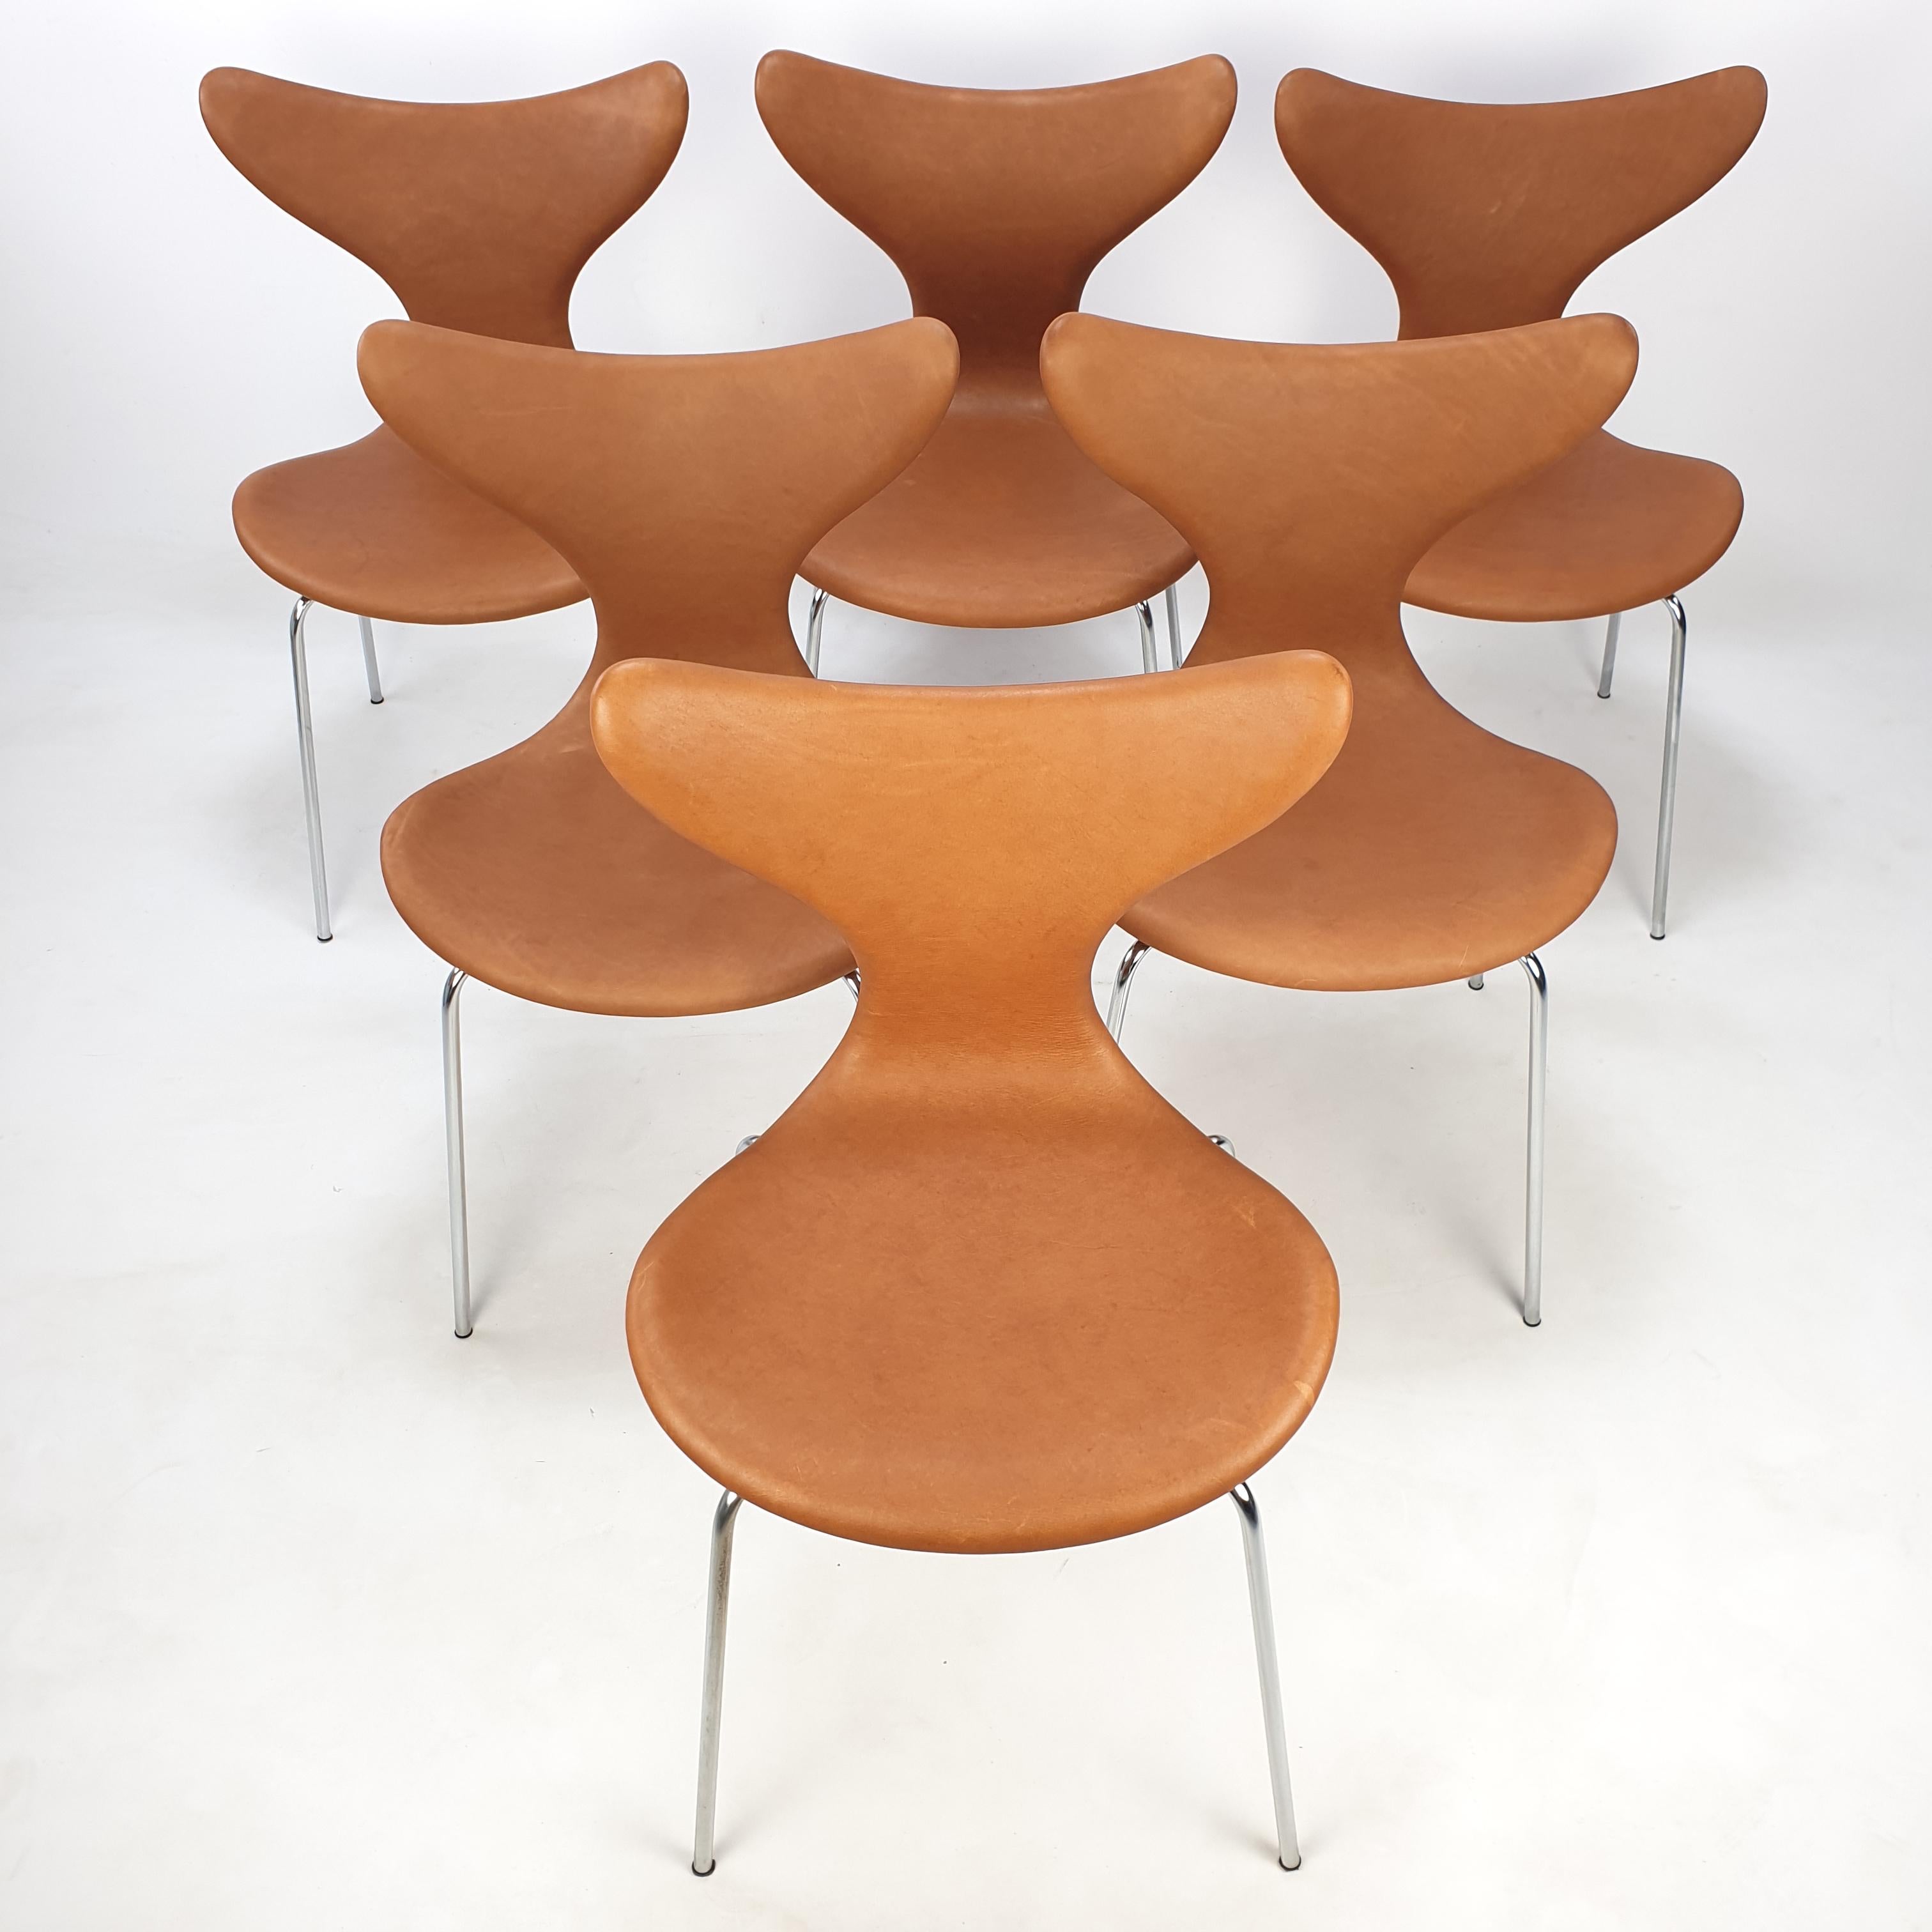 Mid-Century Modern Set of 6 Lily Chairs by Arne Jacobsen for Fritz Hansen, 1960s For Sale